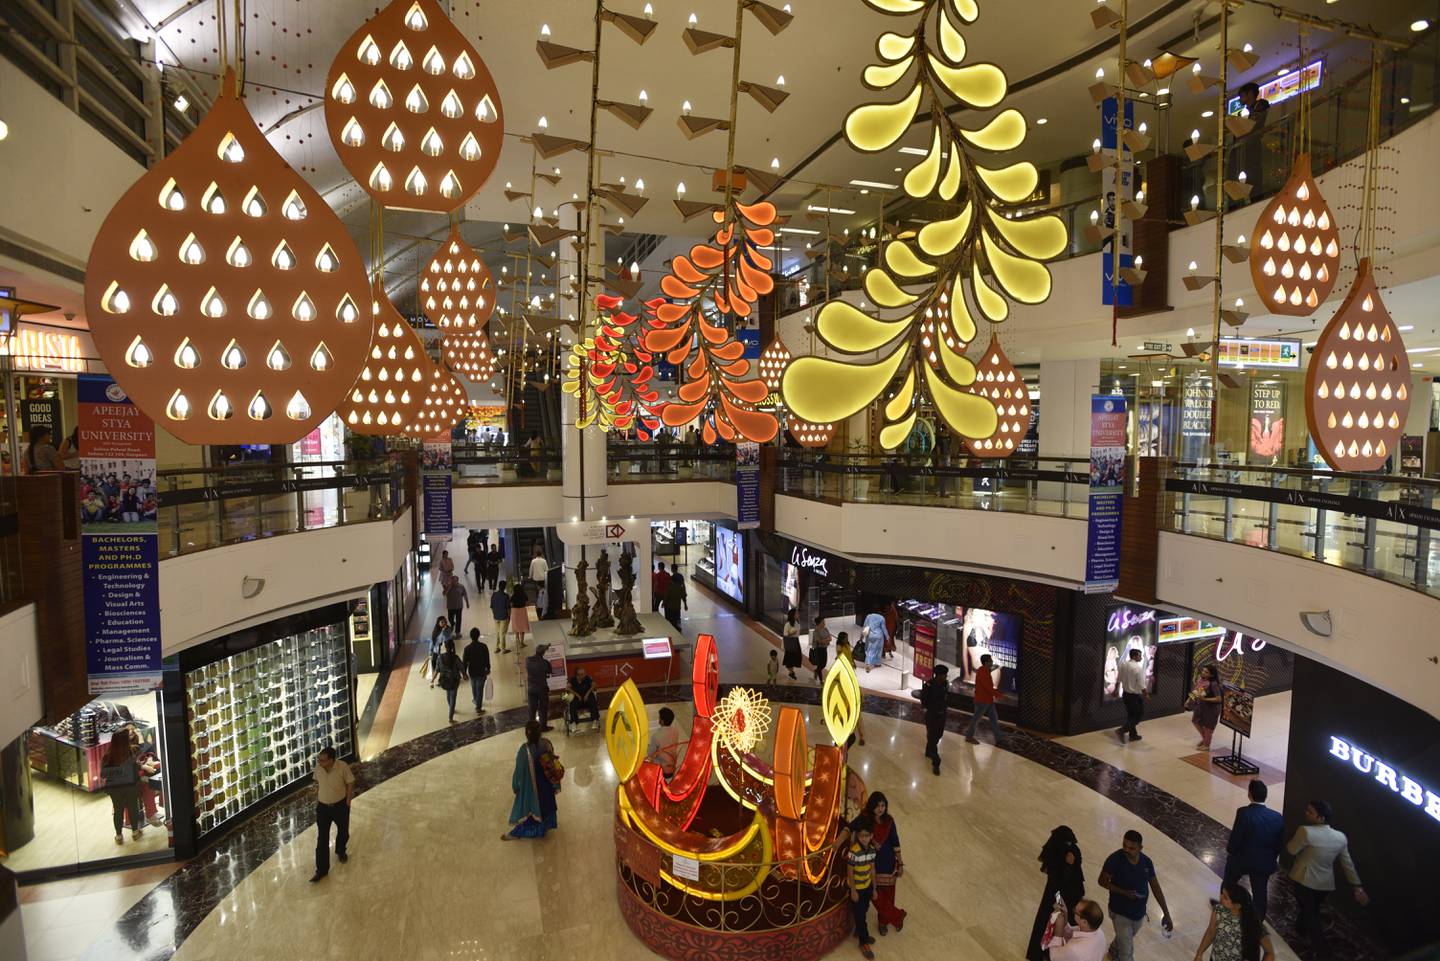 Festive decorations in the Select City Mall in New Delhi, India during the October 2016 Dhanteras holiday leading up to Diwali.